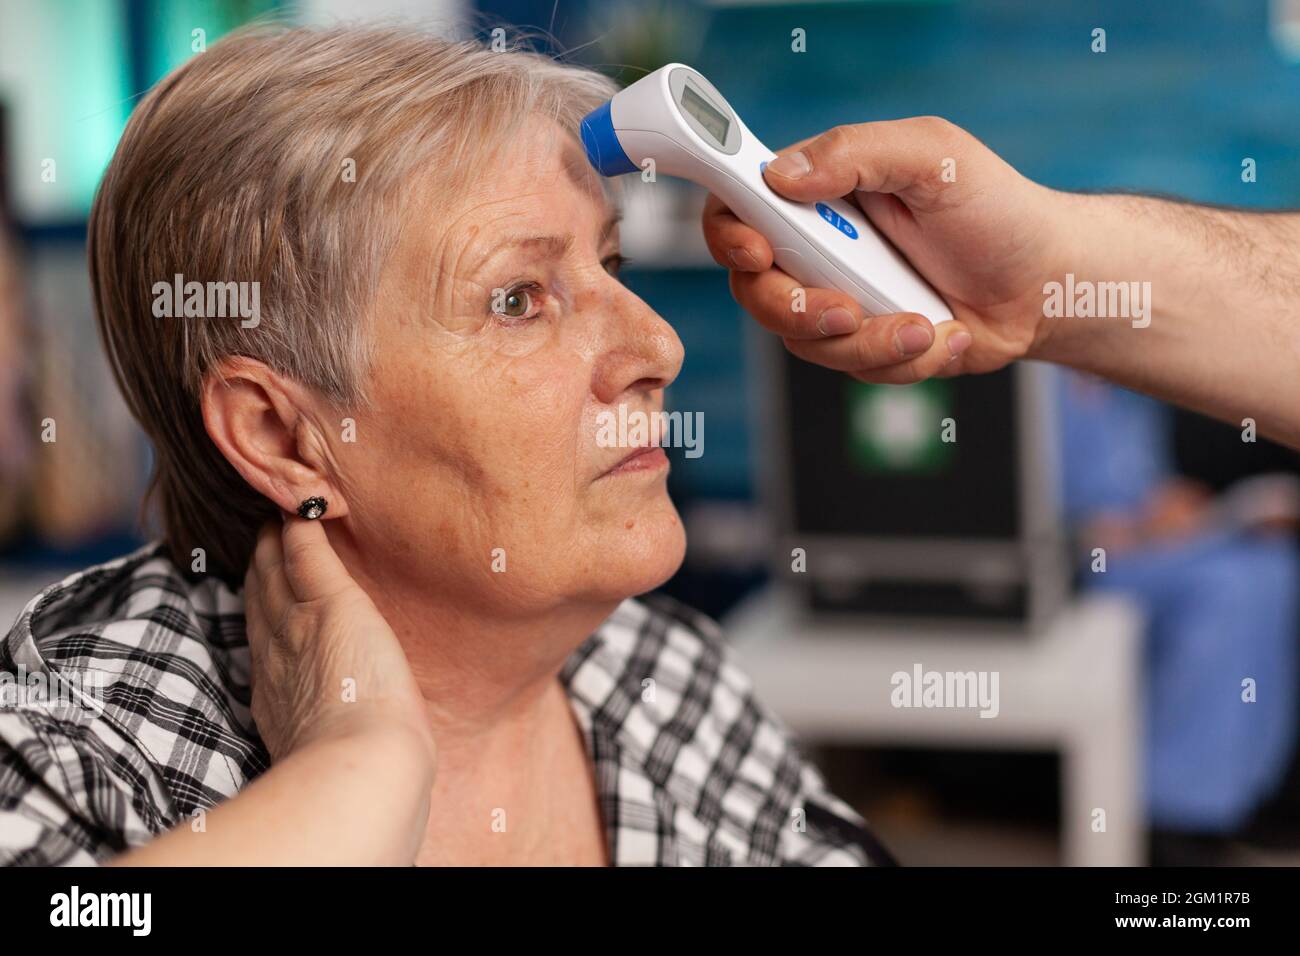 Close-up of assistant man helper checking temperature using medical infrared thermometer discussing with senior woman. Social services nursing elderly retired female. Healthcare assistance Stock Photo